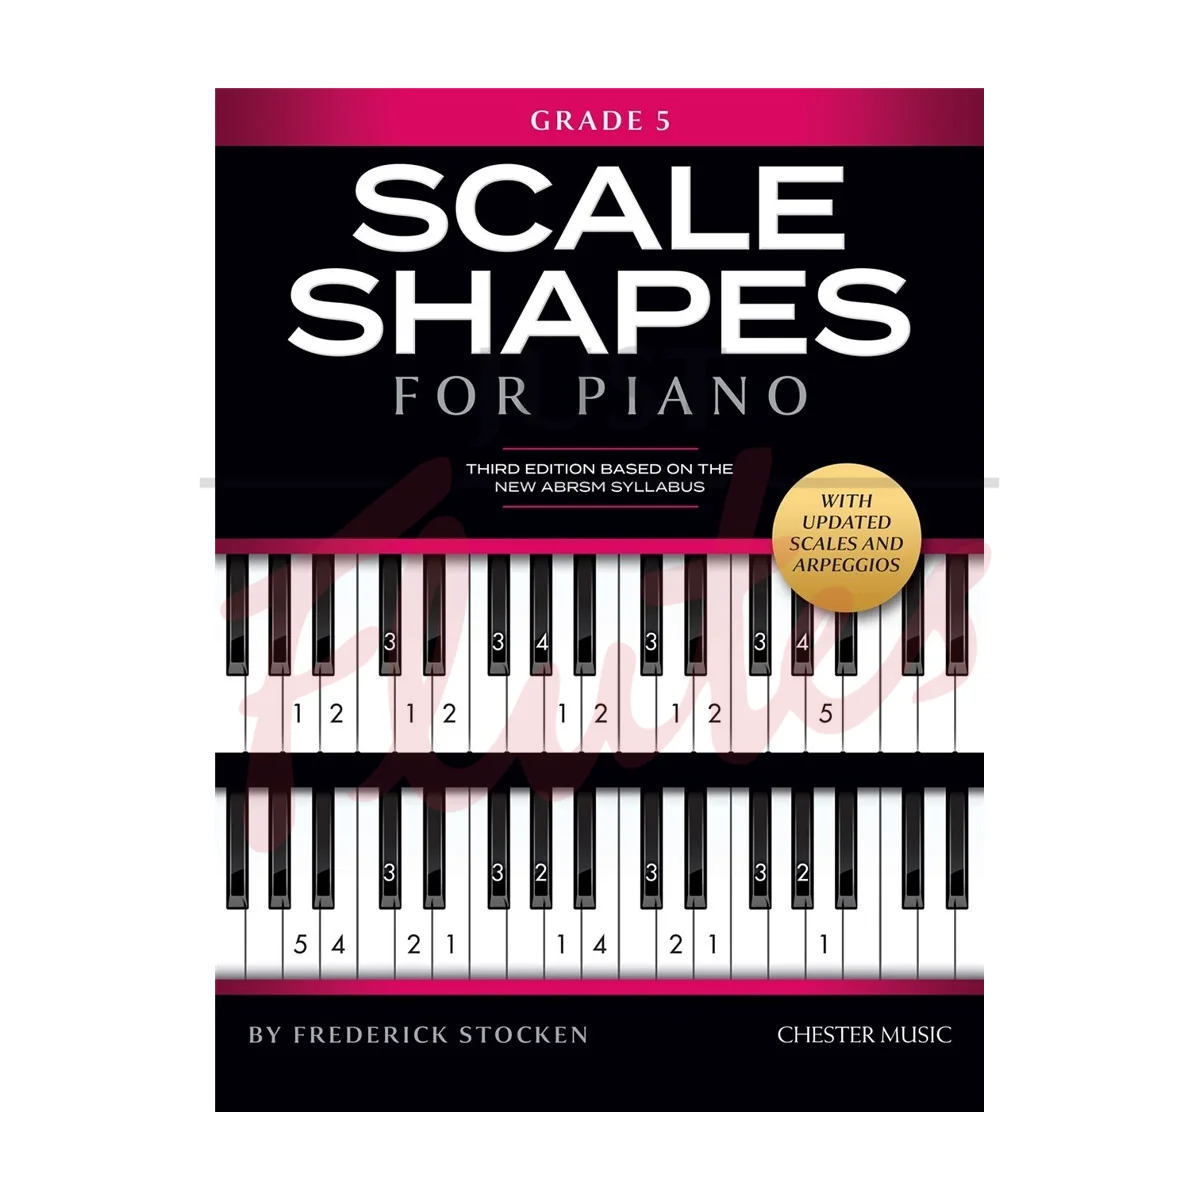 Scale Shapes for Piano - Grade 5 (3rd Edition)